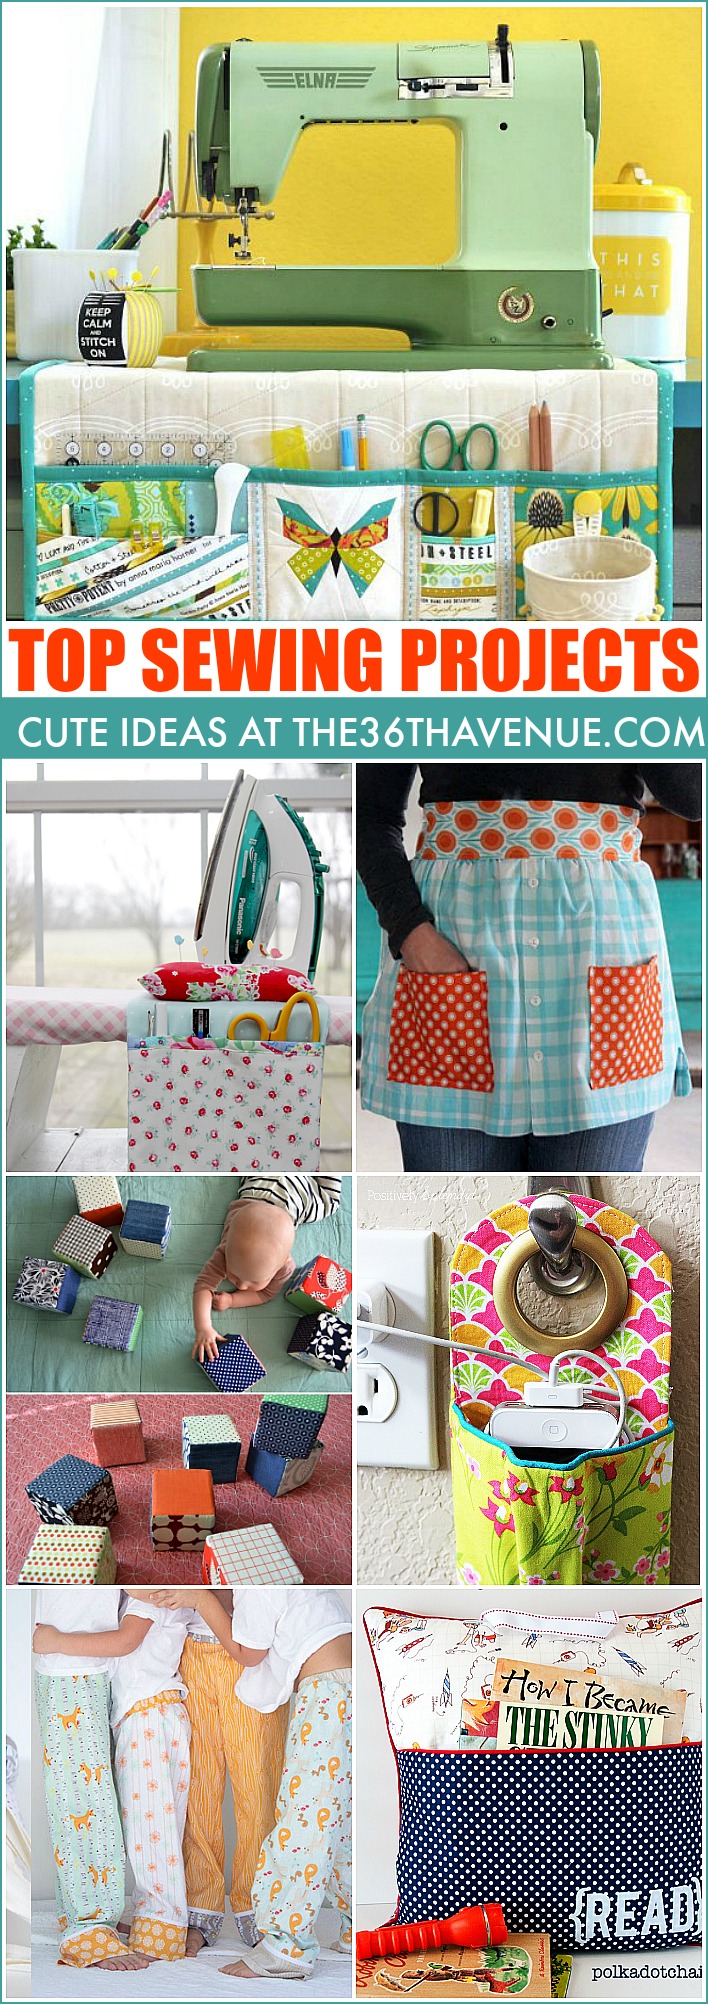 Pin on Sewing projects